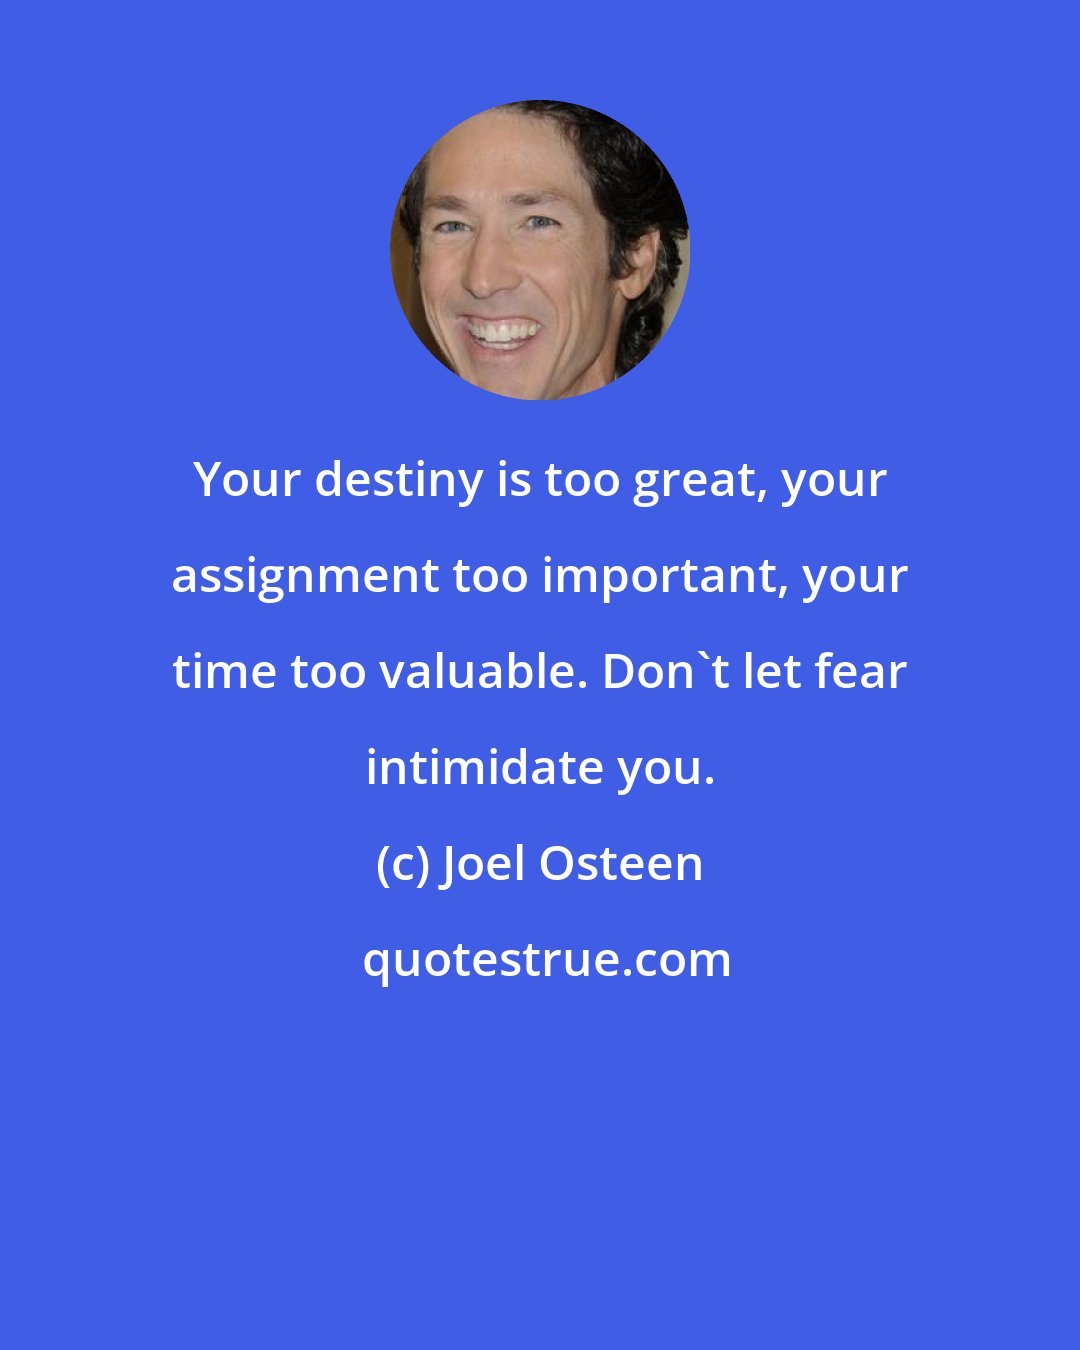 Joel Osteen: Your destiny is too great, your assignment too important, your time too valuable. Don't let fear intimidate you.